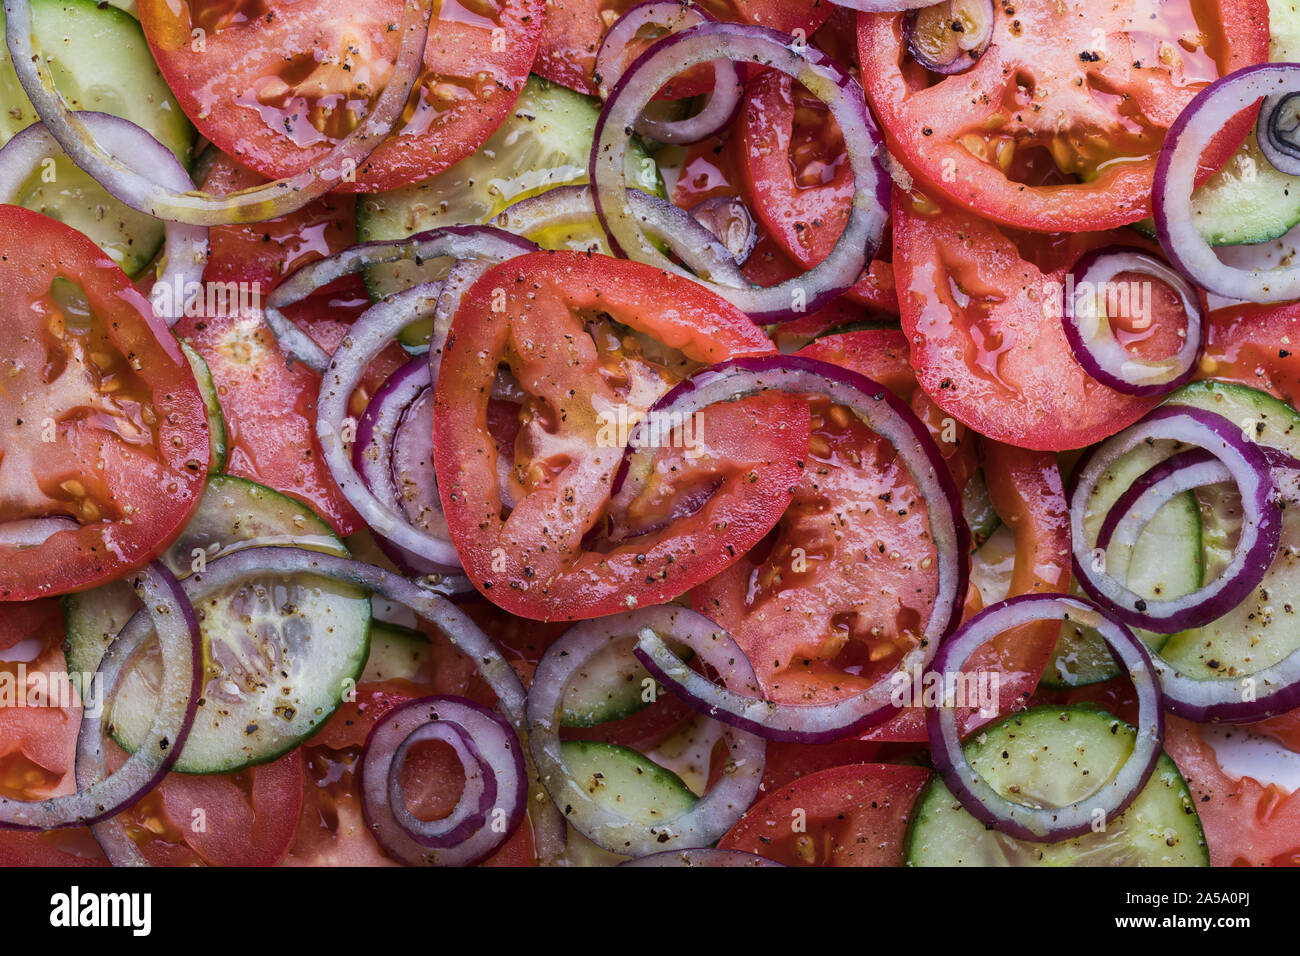 Close-up of a healthy organic salad with tomatoes, red onion and cucumber, seen from above. There are crushed black peppercorns and olive oil on the s Stock Photo